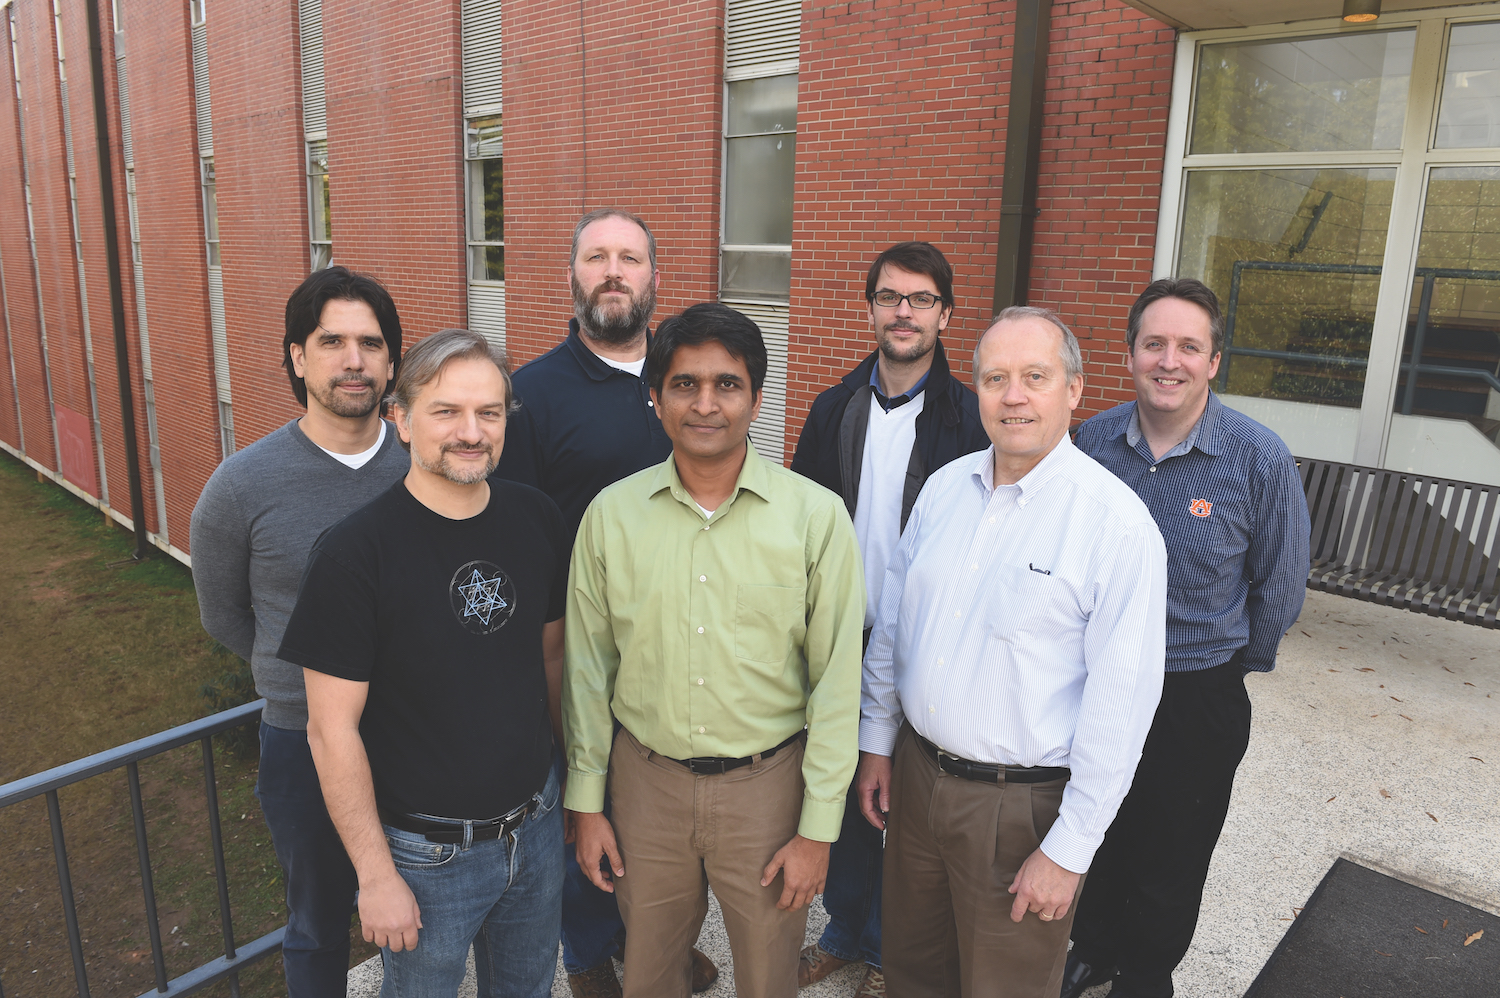 Faculty from the Department of Physics